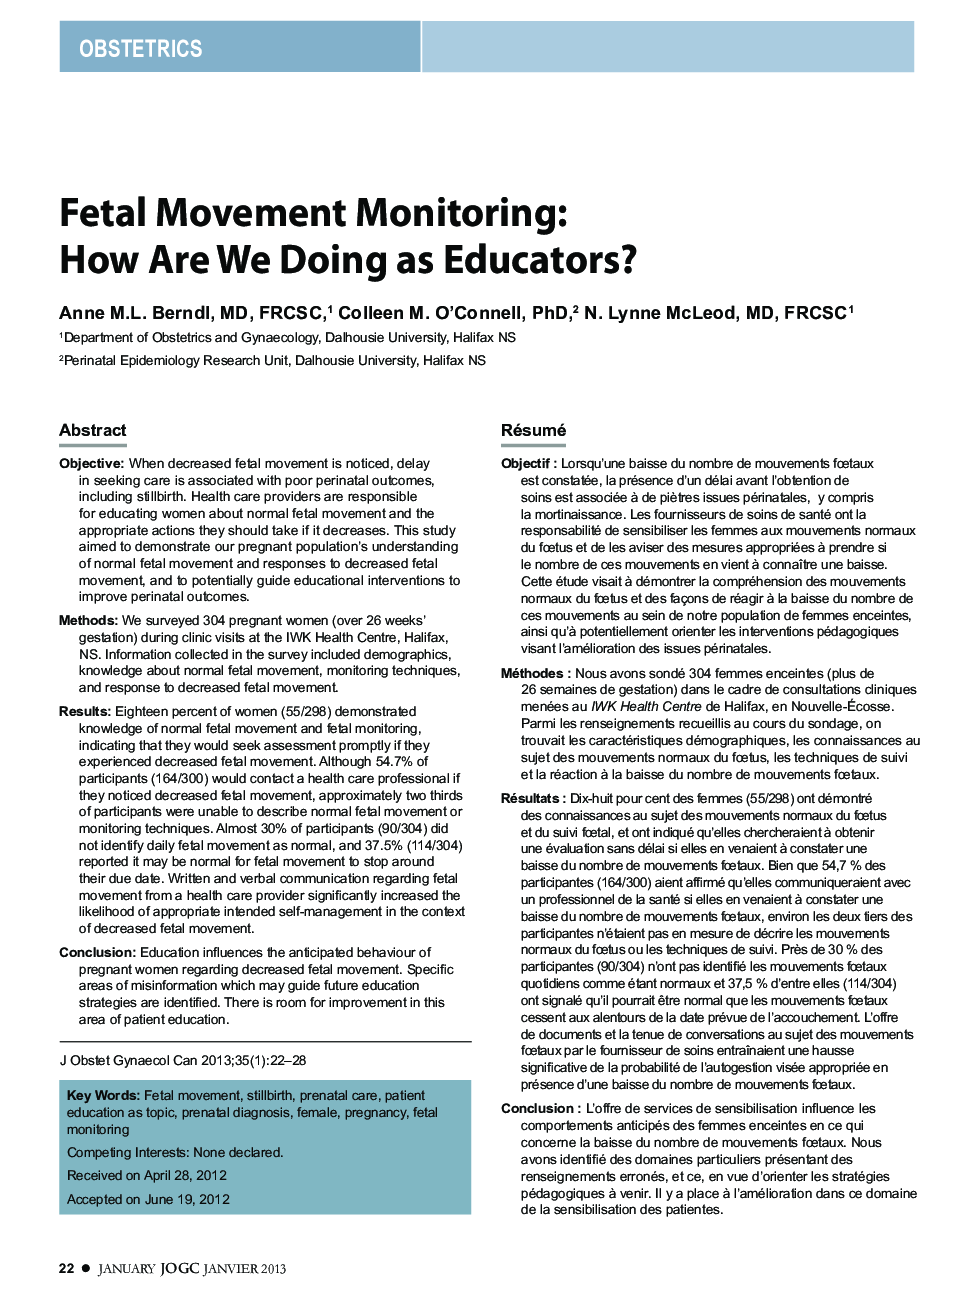 Fetal Movement Monitoring: How Are We Doing as Educators?